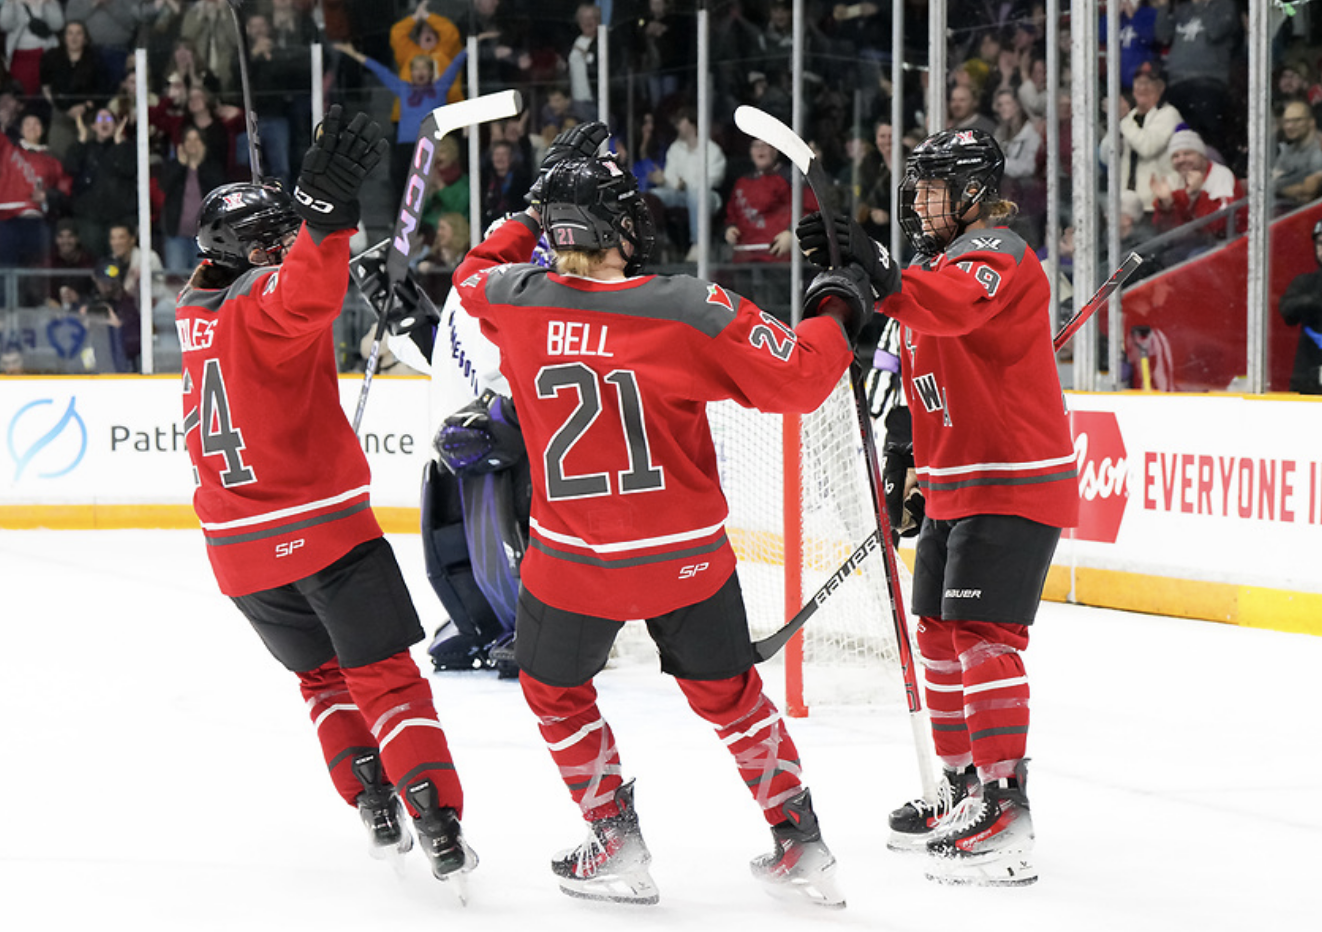 Emma Buckles and Ashton Bell skate to hug Brianne Jenner after one of her goals against Minnesota. Jenner is pointing at them, while Bell and Buckles have their arms raised. They're all in red home uniforms.